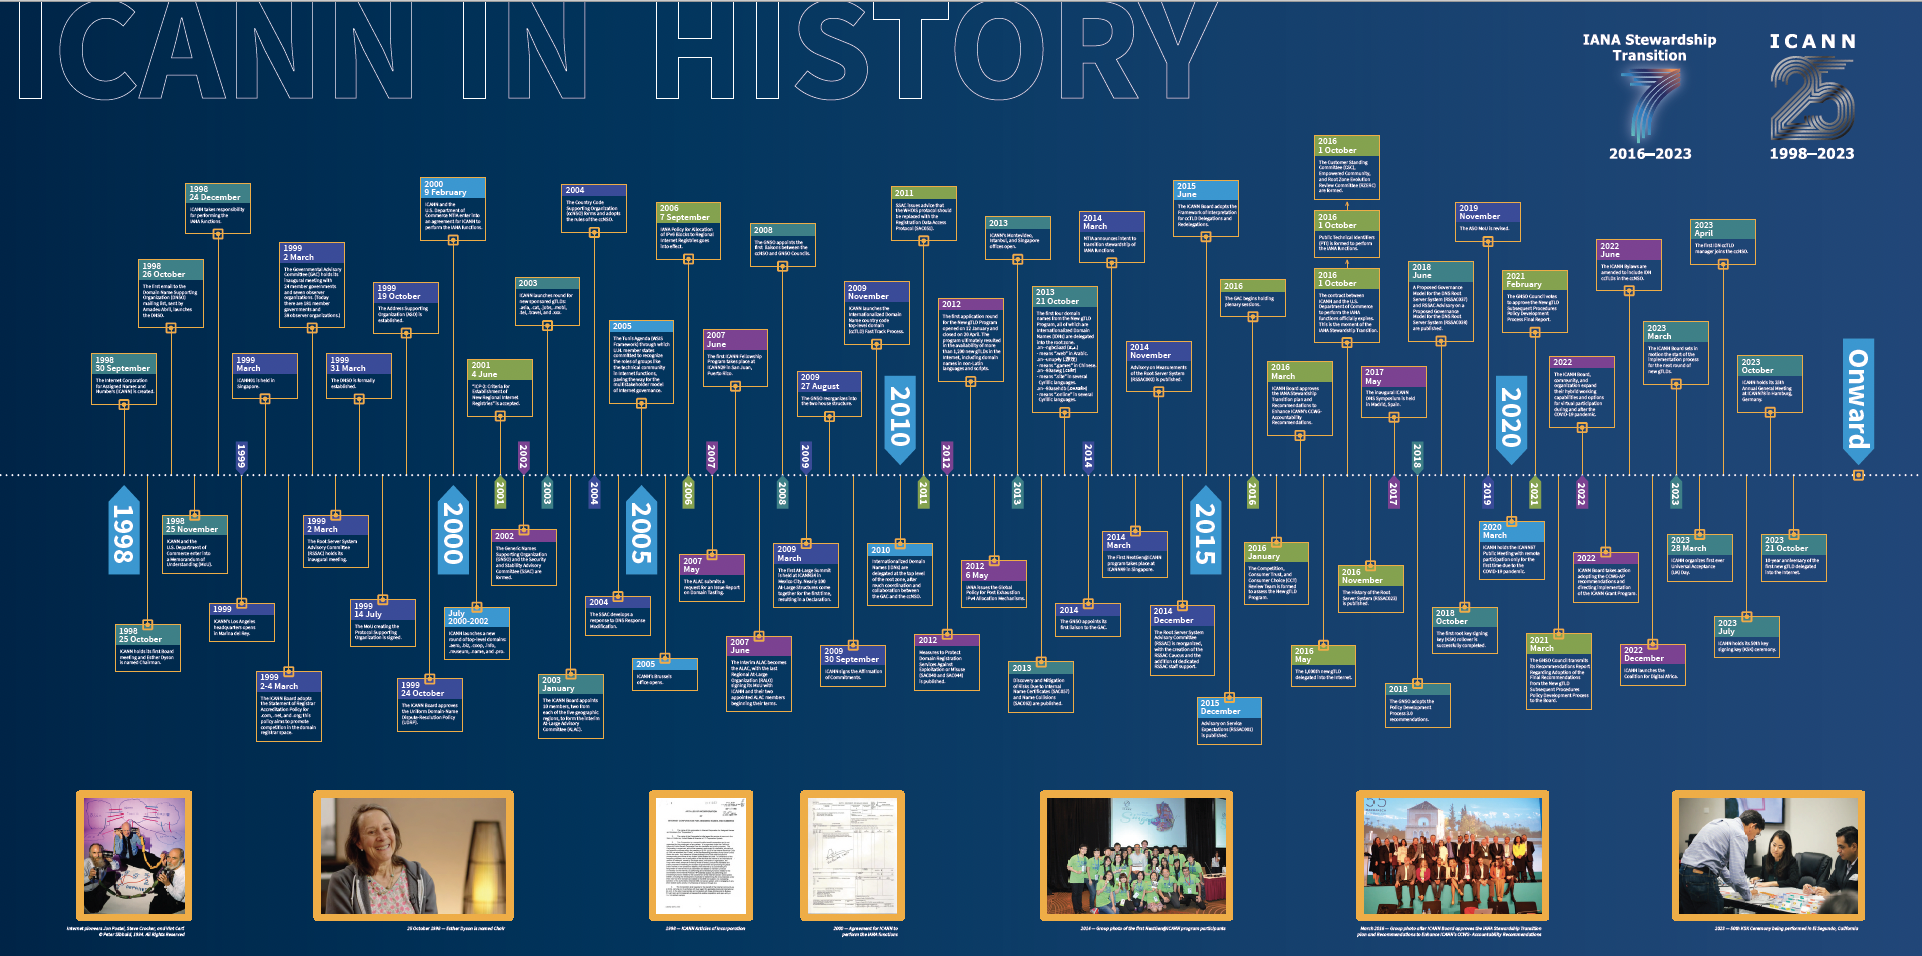 Time of ICANN's History